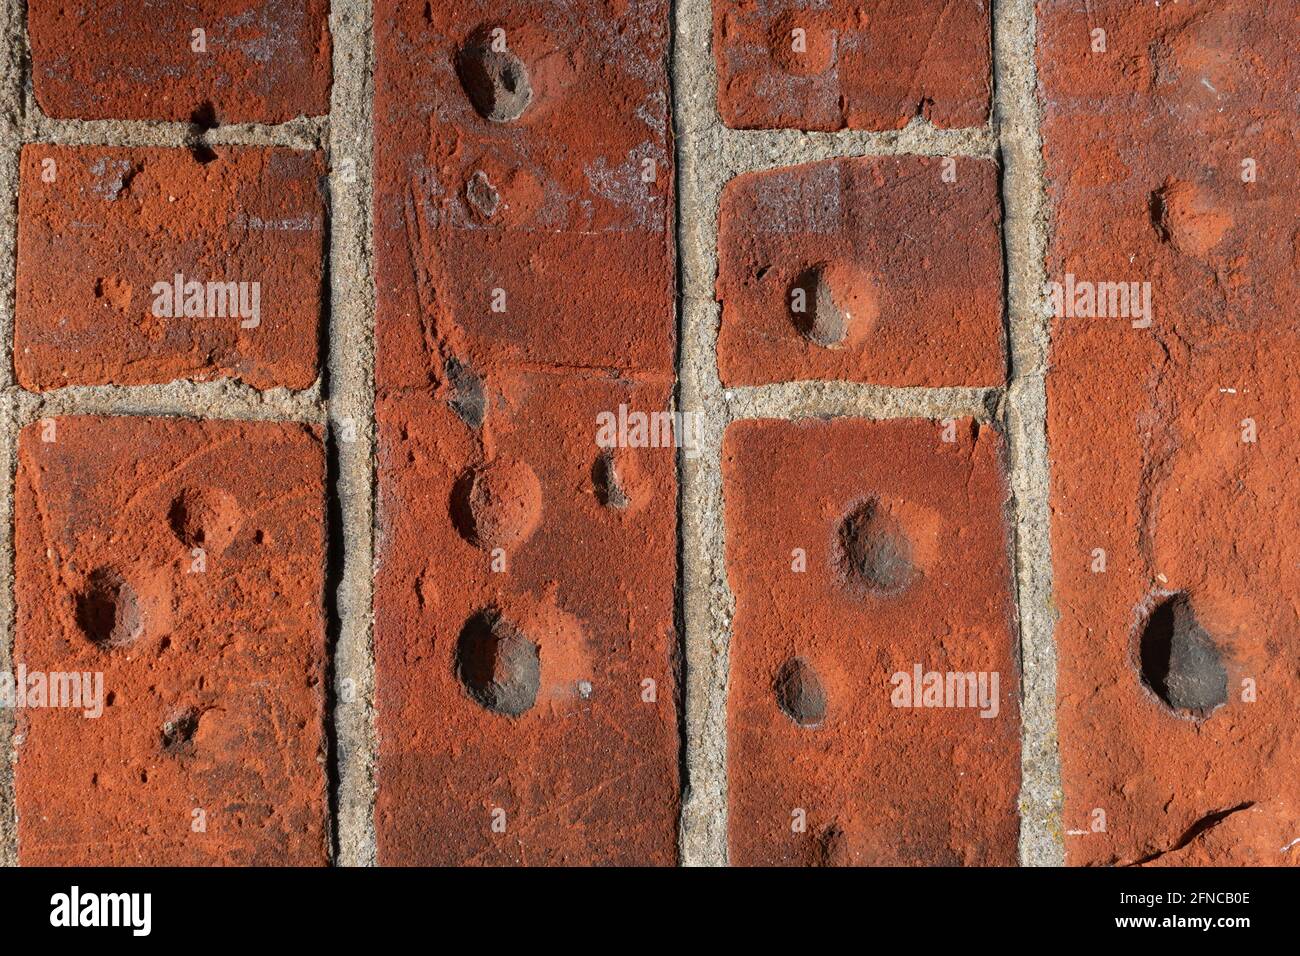 These circular holes in the red bricks have been made by people twisting coins against the wall while waiting to get into the Bath House. Stock Photo